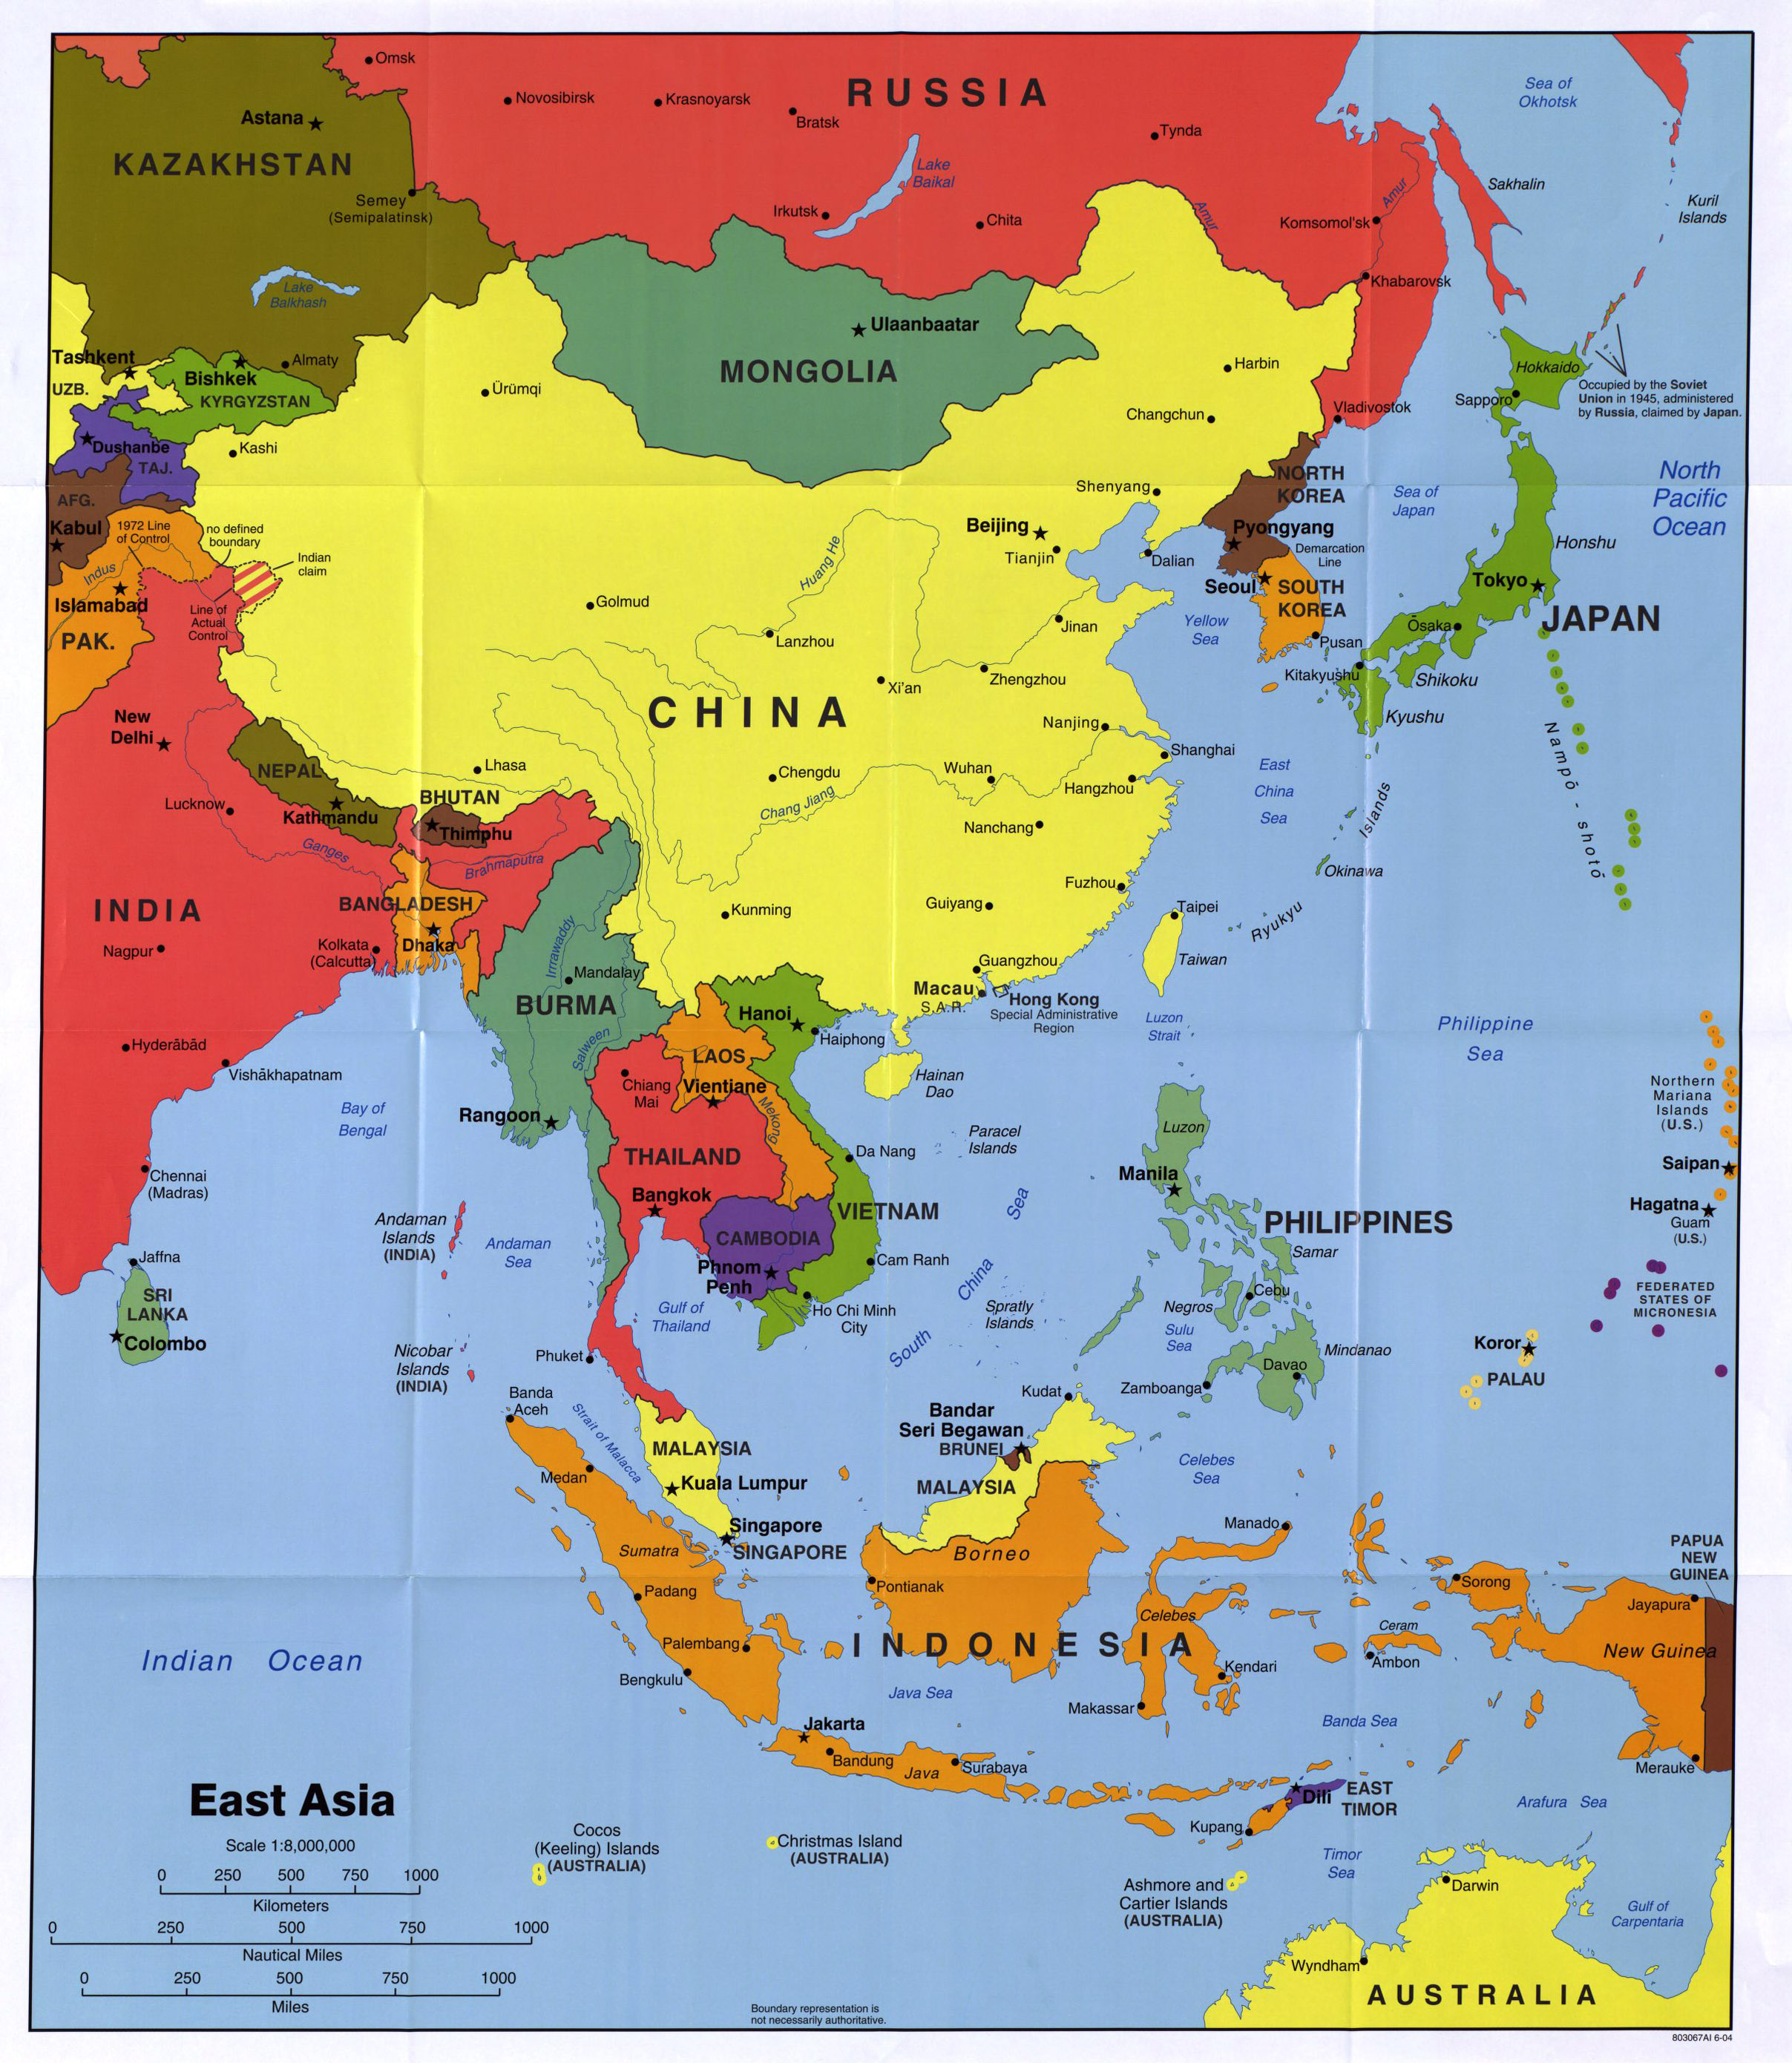 east asia map with capitals Large Detailed Political Map Of East Asia With Major Cities And east asia map with capitals